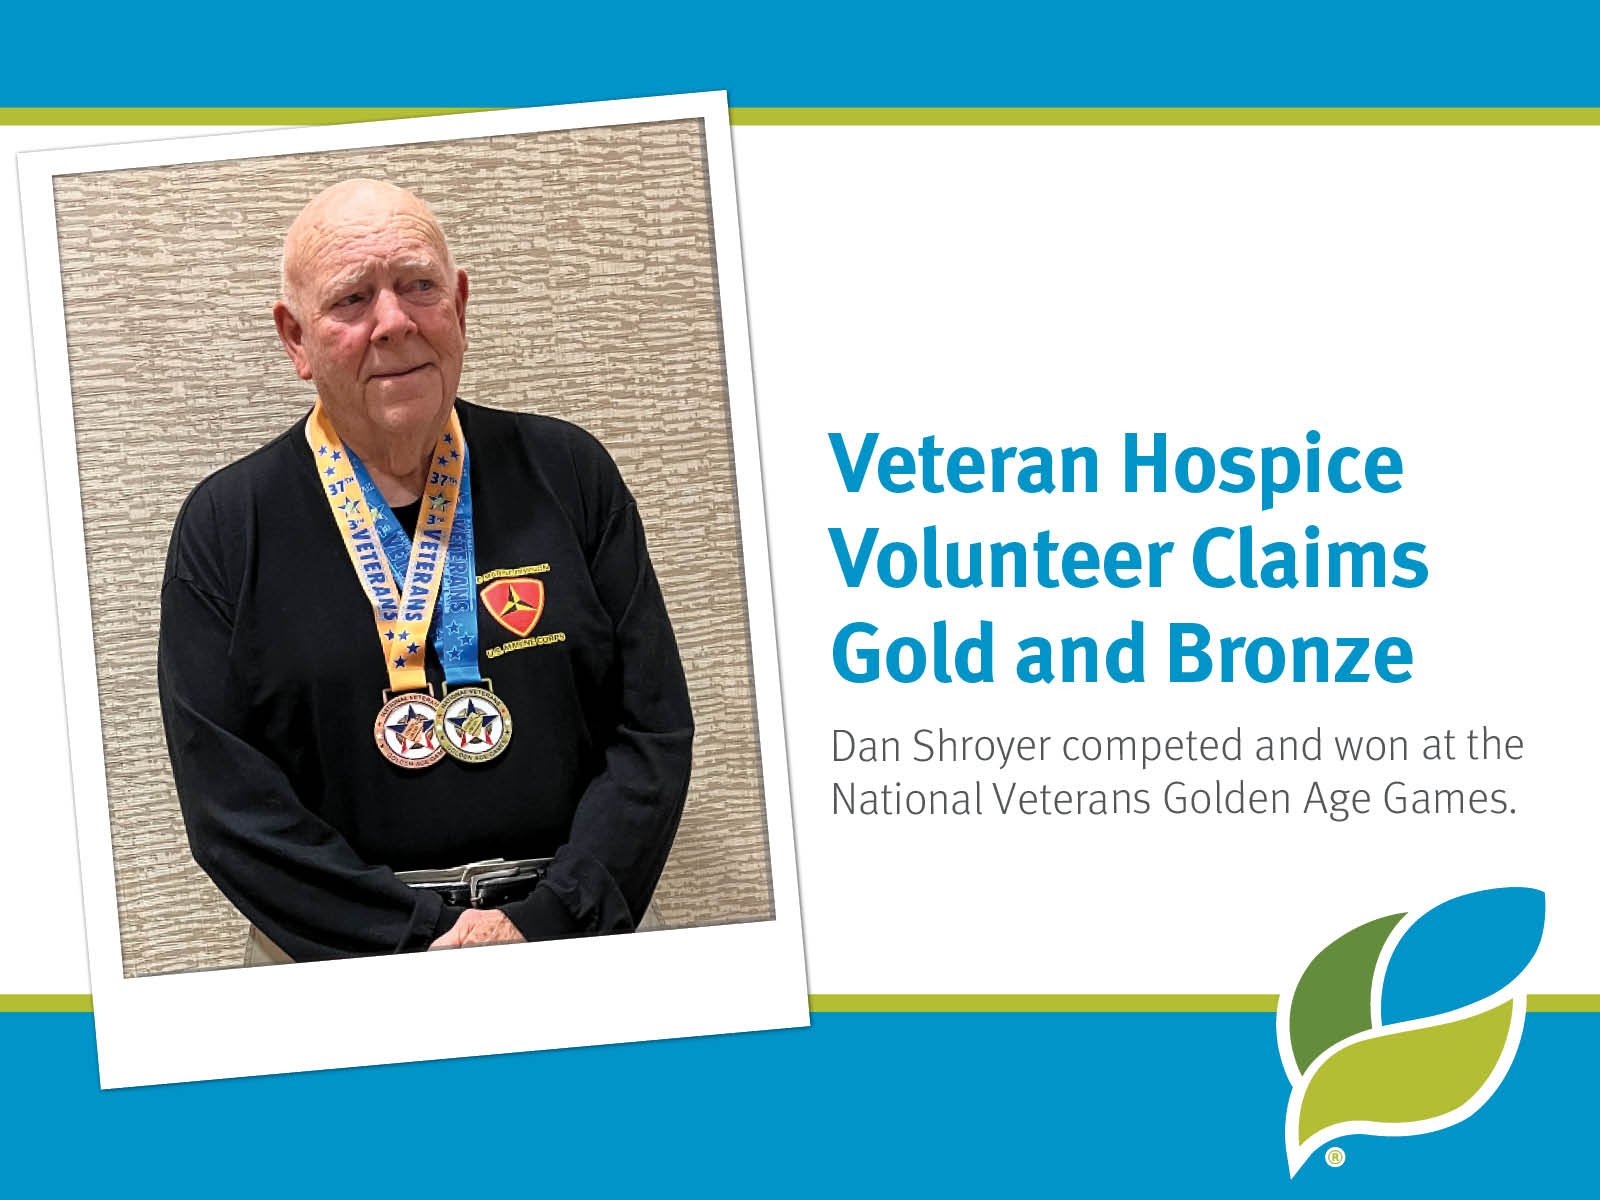 Veteran hospice volunteer claims gold and bronze. Dan Shroyer competed and won at the National Veterans Golden Age Games. Ohio's Hospice